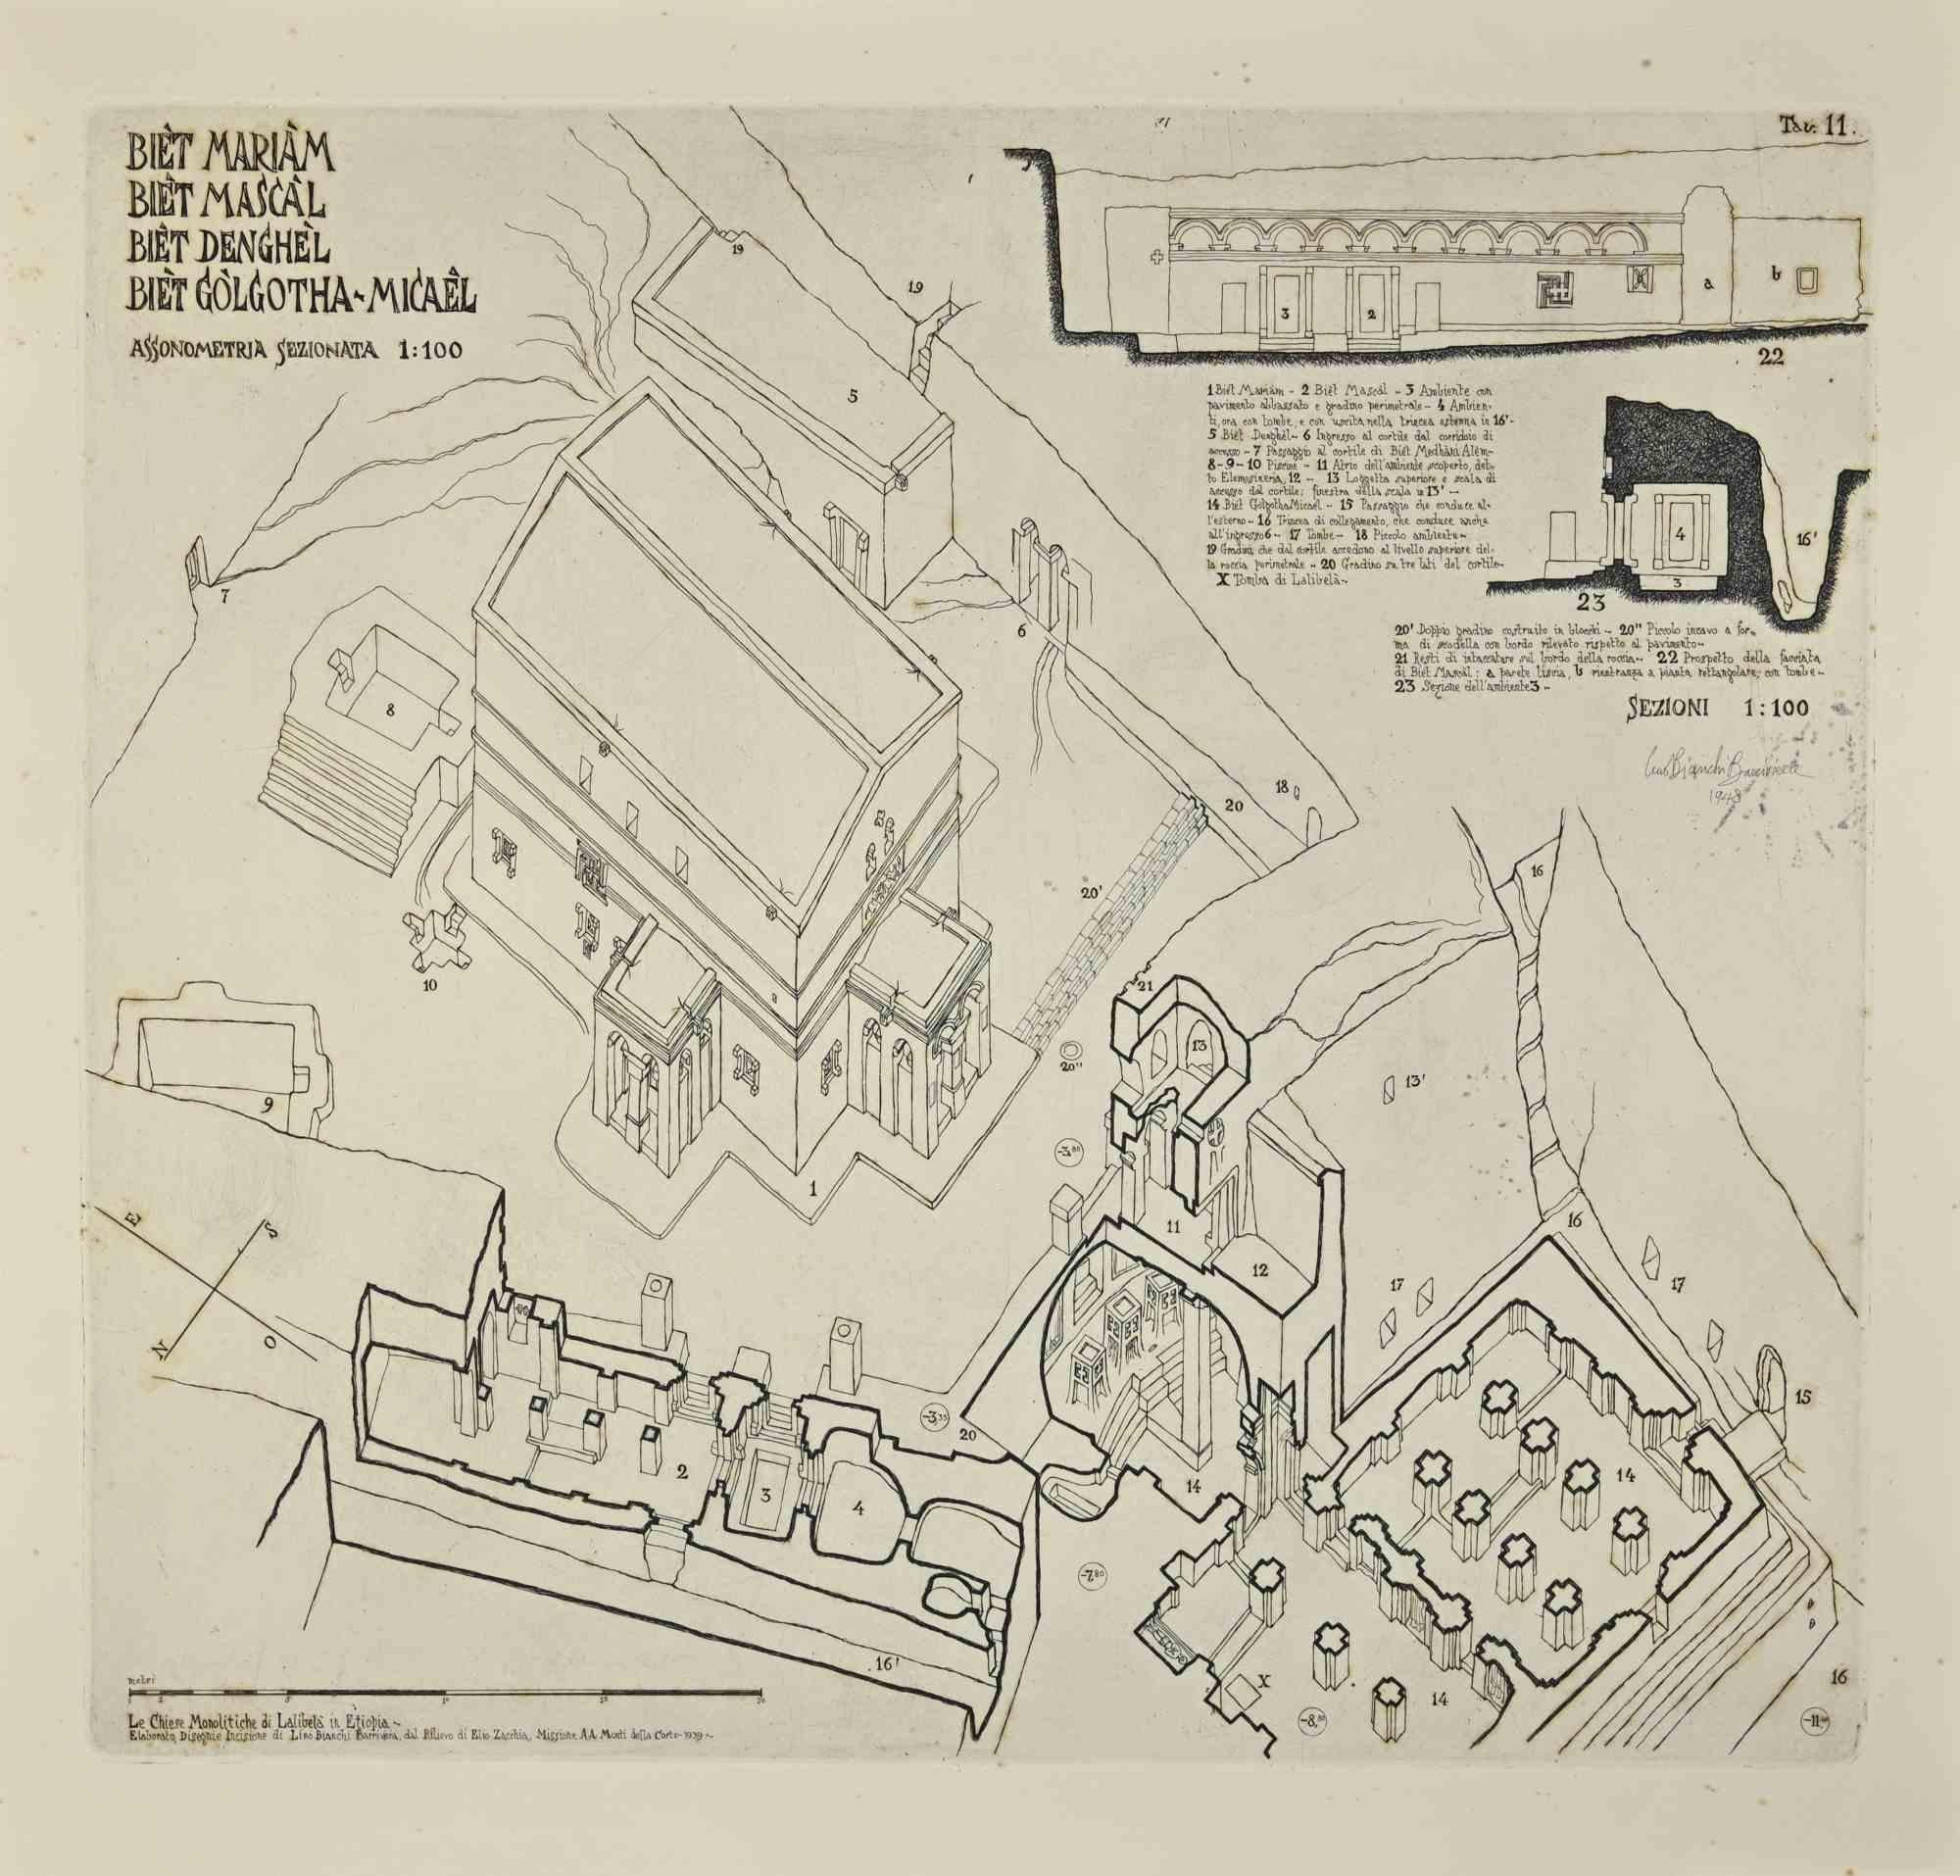 Ethiopian Churches floor plans is a modern artwork realized by Lino Bianchi Barriviera in 1948.

Black and white etching.

Signed and dated on plate.

Plate n.11 (as reported on the higher margin).

The artwork is from the series "The monolithic